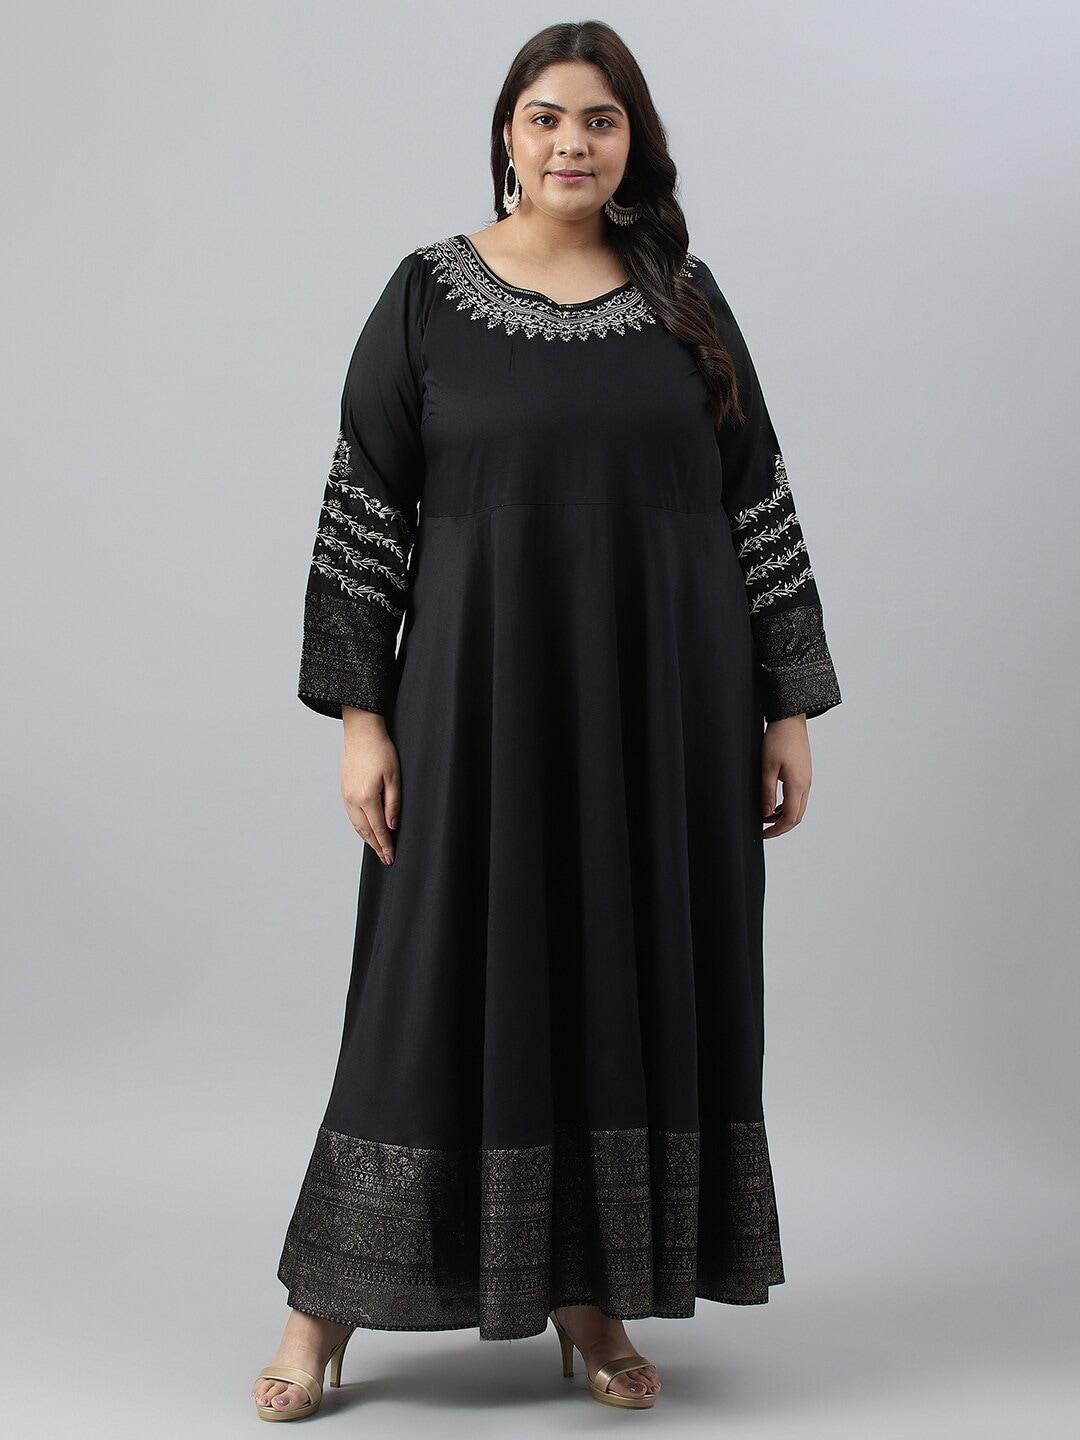 W Plus Size Floral Embroidered Ethnic Maxi Dress